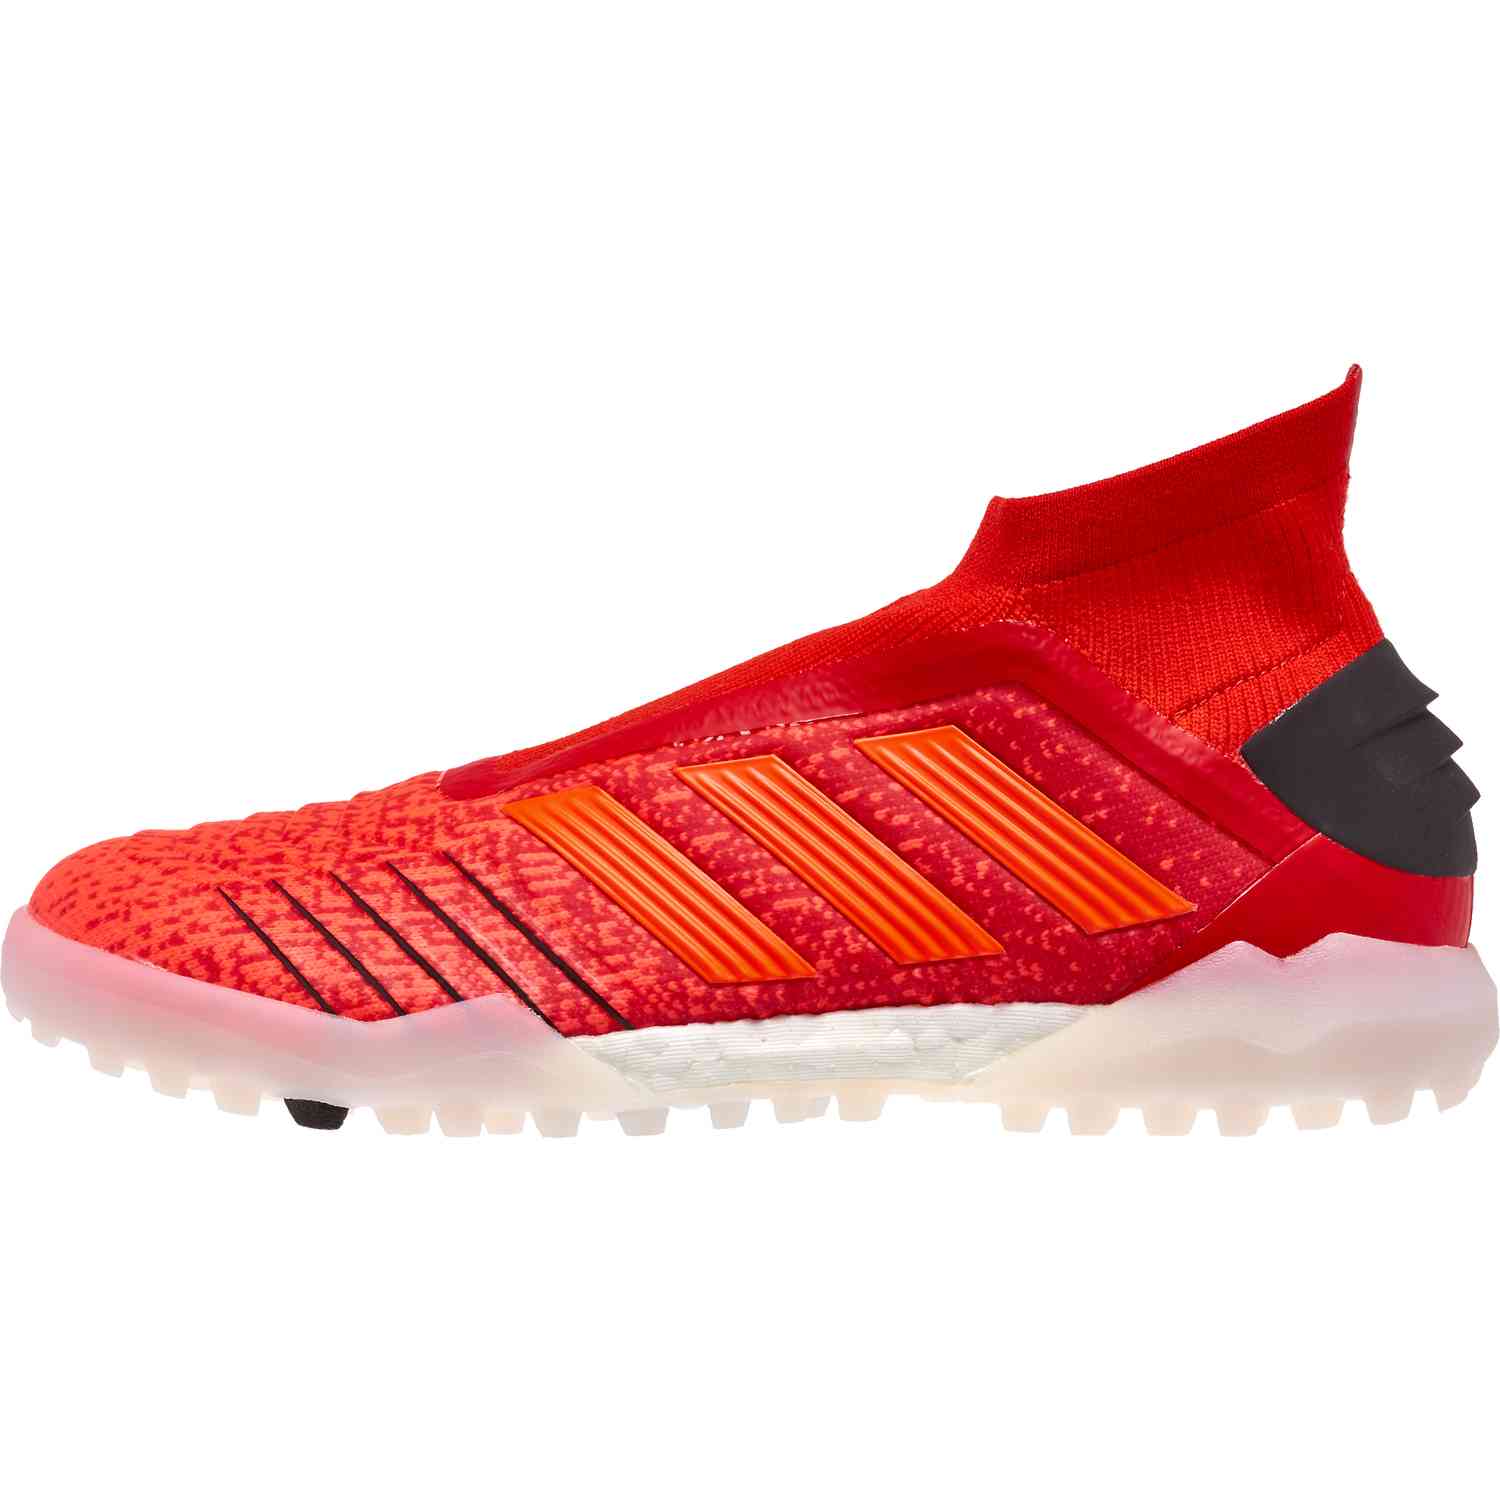 Escándalo freno Anécdota SoccerPro on Twitter: "FRESH. adidas Predator Tango 19+ Indoor and Turf  shoes. Buy them &gt; https://t.co/4FJSX0wk9o https://t.co/AOmLQrwWWQ" /  Twitter